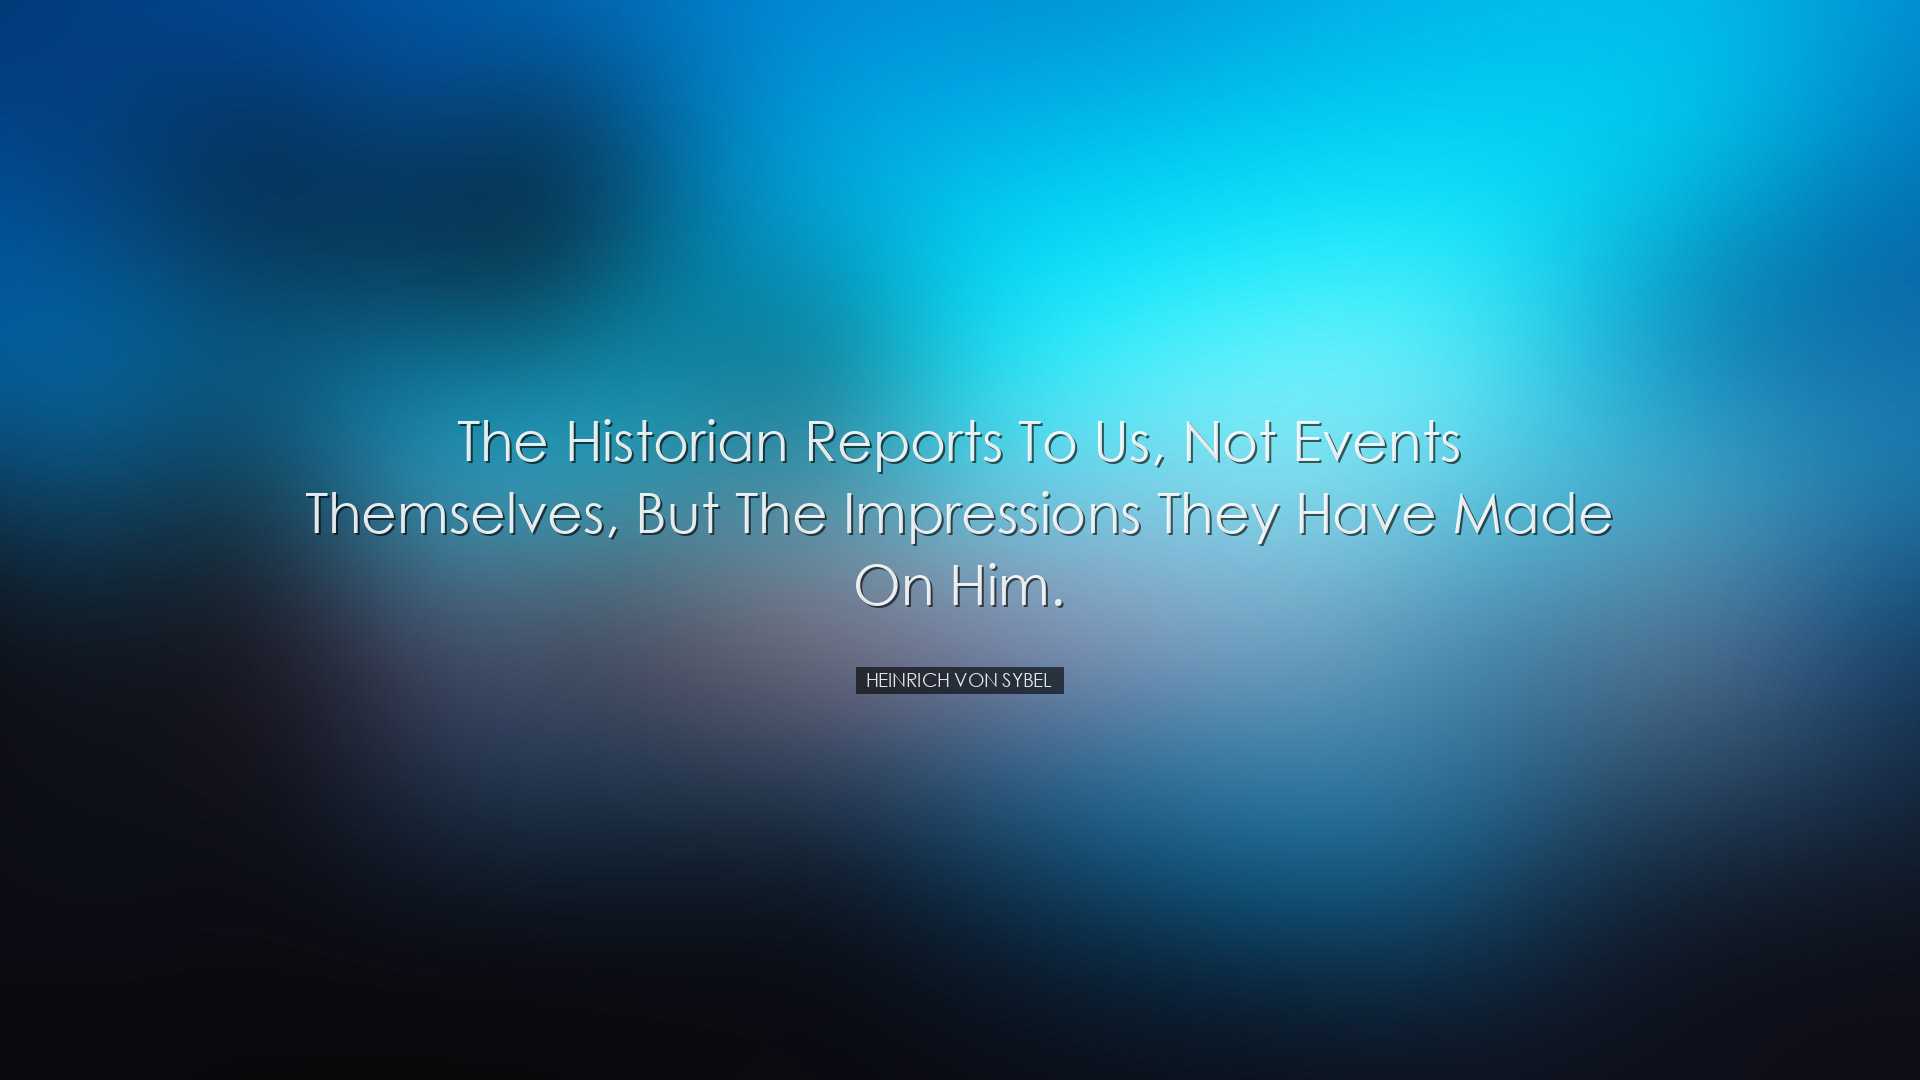 The historian reports to us, not events themselves, but the impres